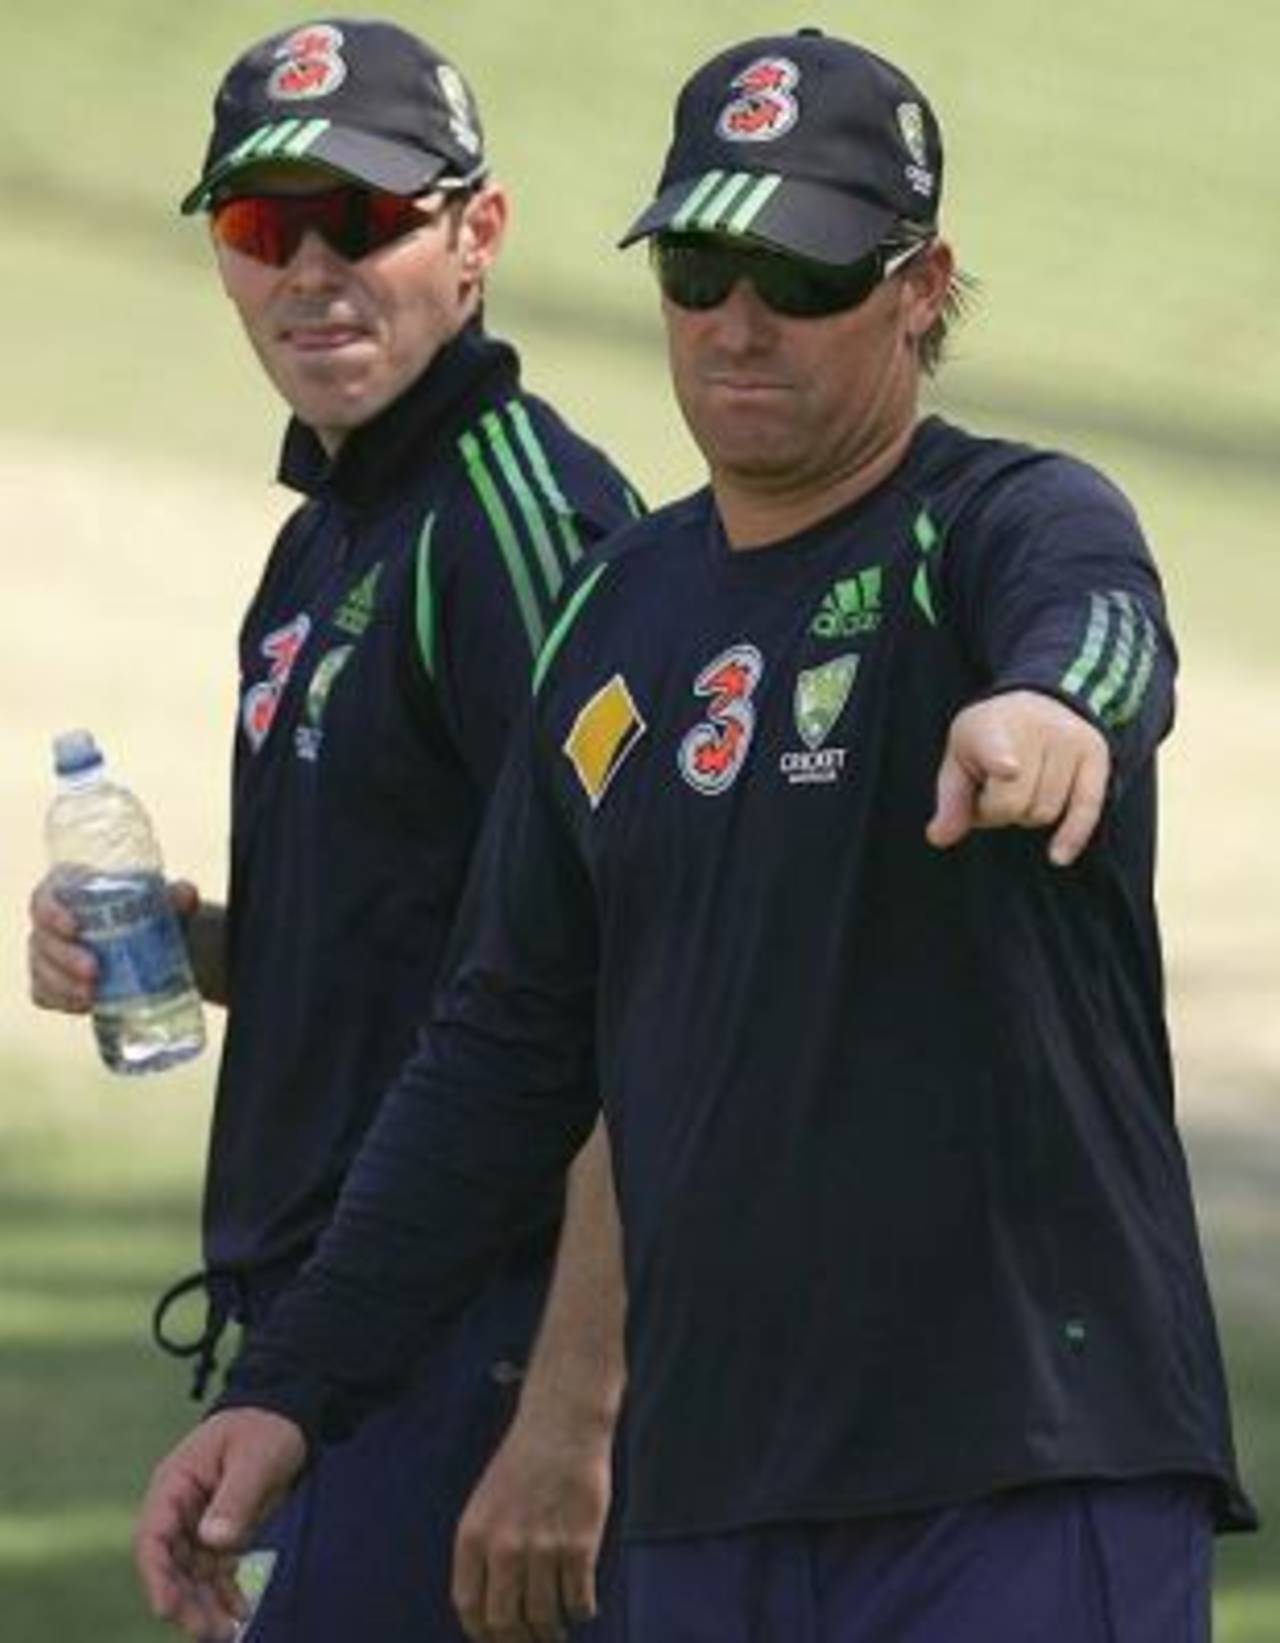 Damien Martyn and Shane Warne take a break during a training session, Adelaide, November 29, 2006 